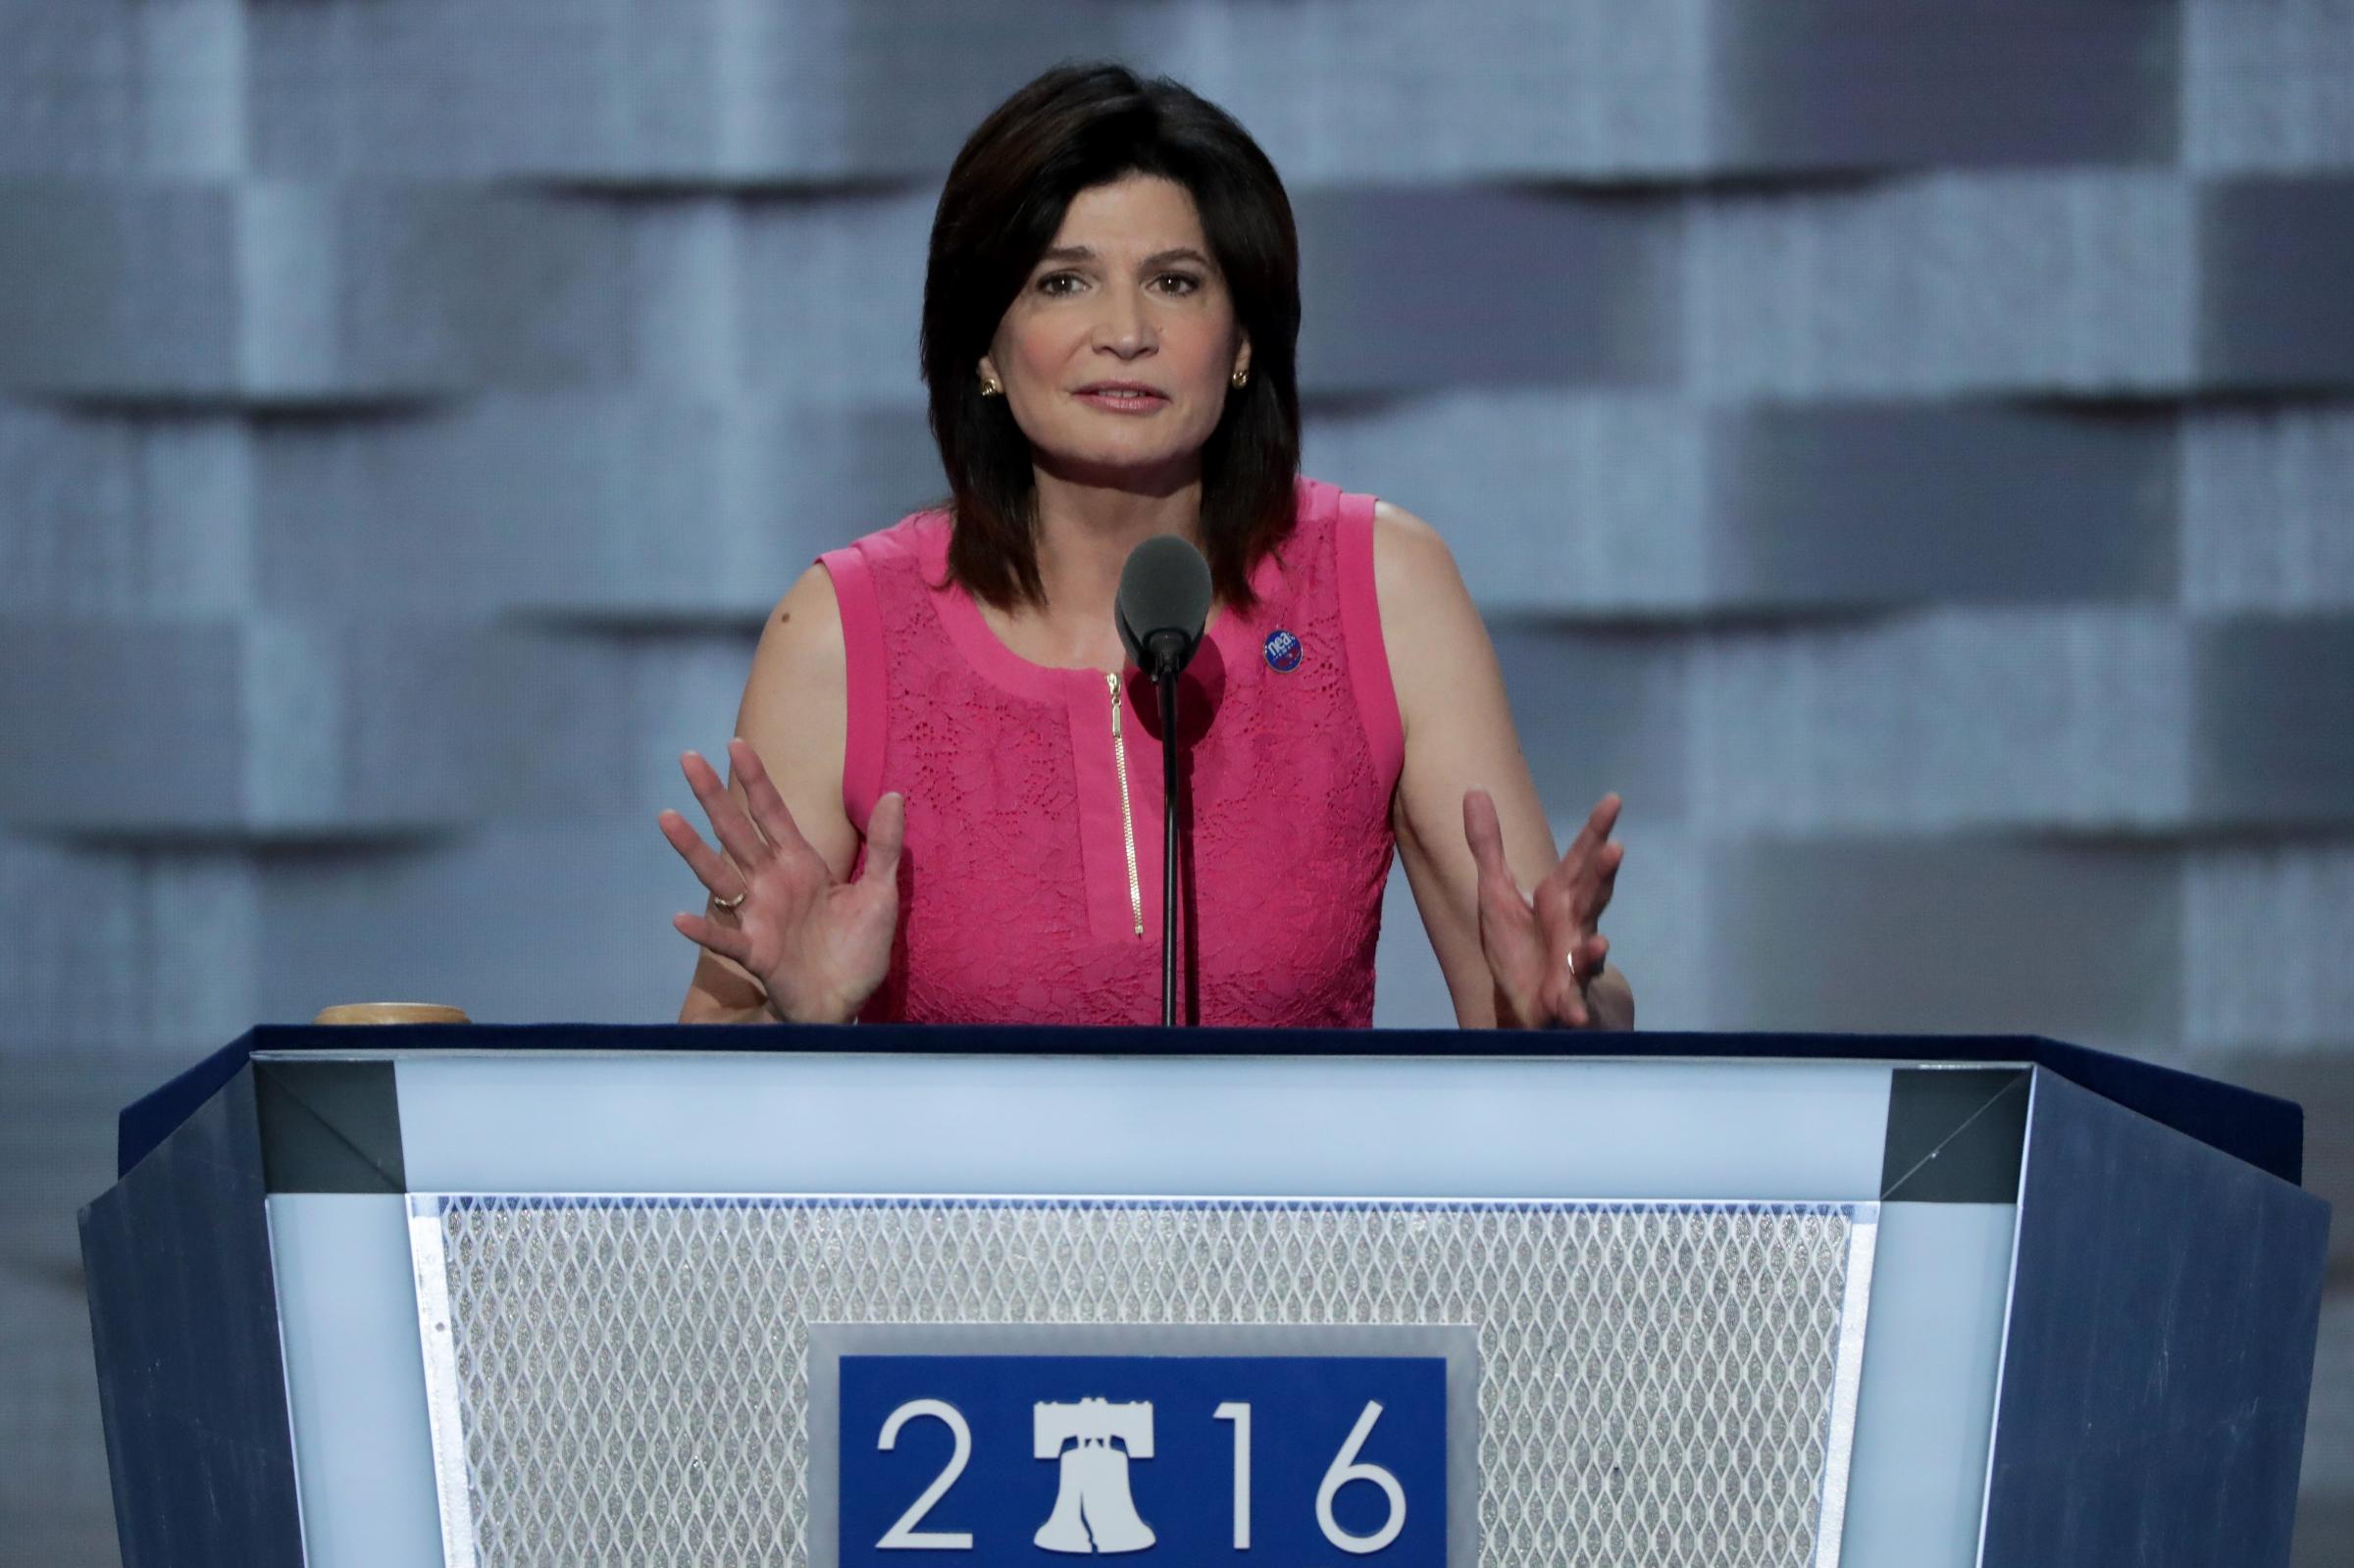 Lily Eskelsen Garcia, president of the National Education Association, delivers remarks on the first day of the Democratic National Convention at the Wells Fargo Center on July 25, 2016 in Philadelphia.